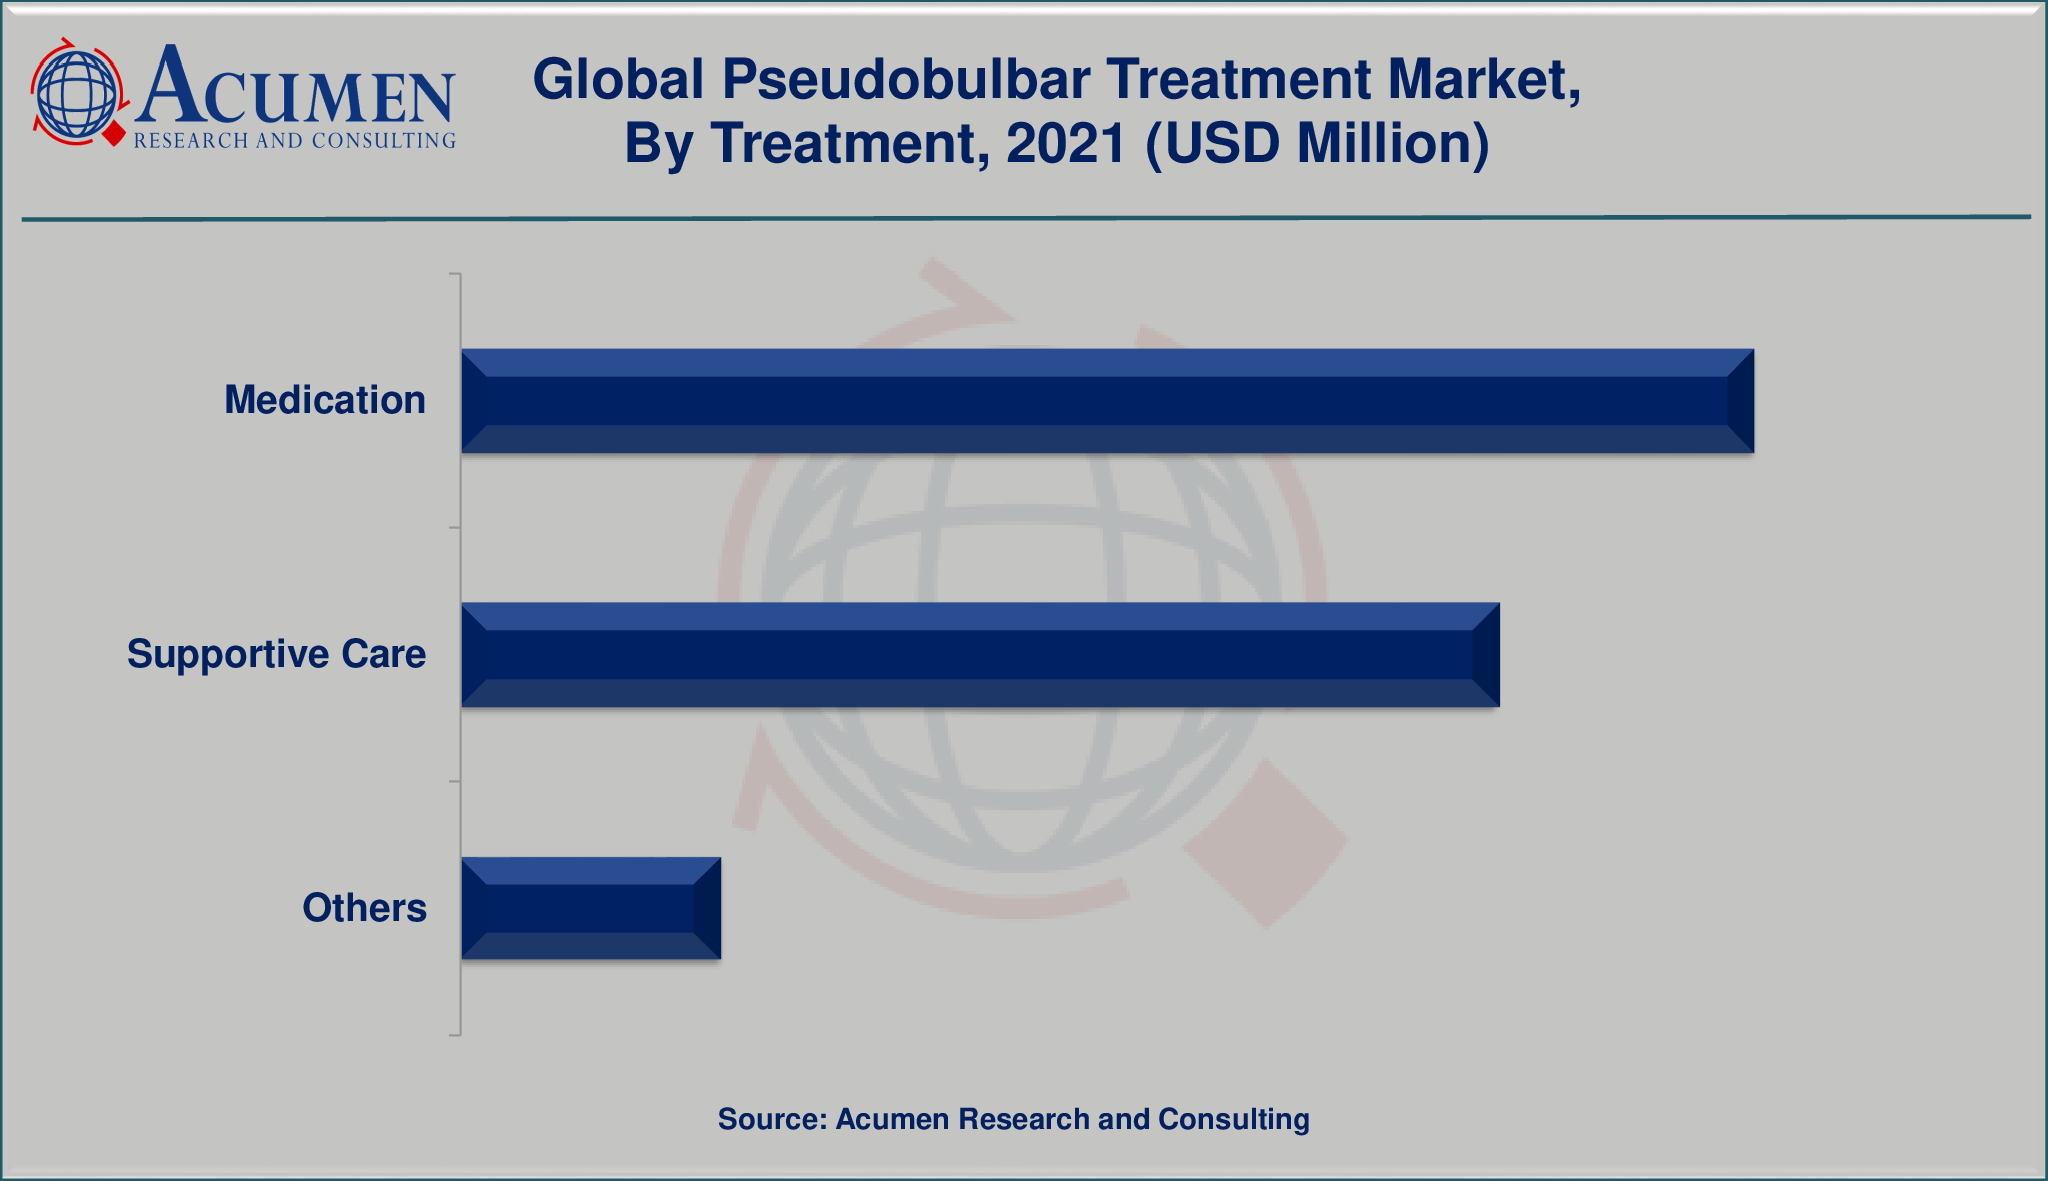 Pseudobulbar Treatment Global Market By Treatment will achieve a market size of USD 6,022 Million by 2030, budding at a CAGR of 9.4%